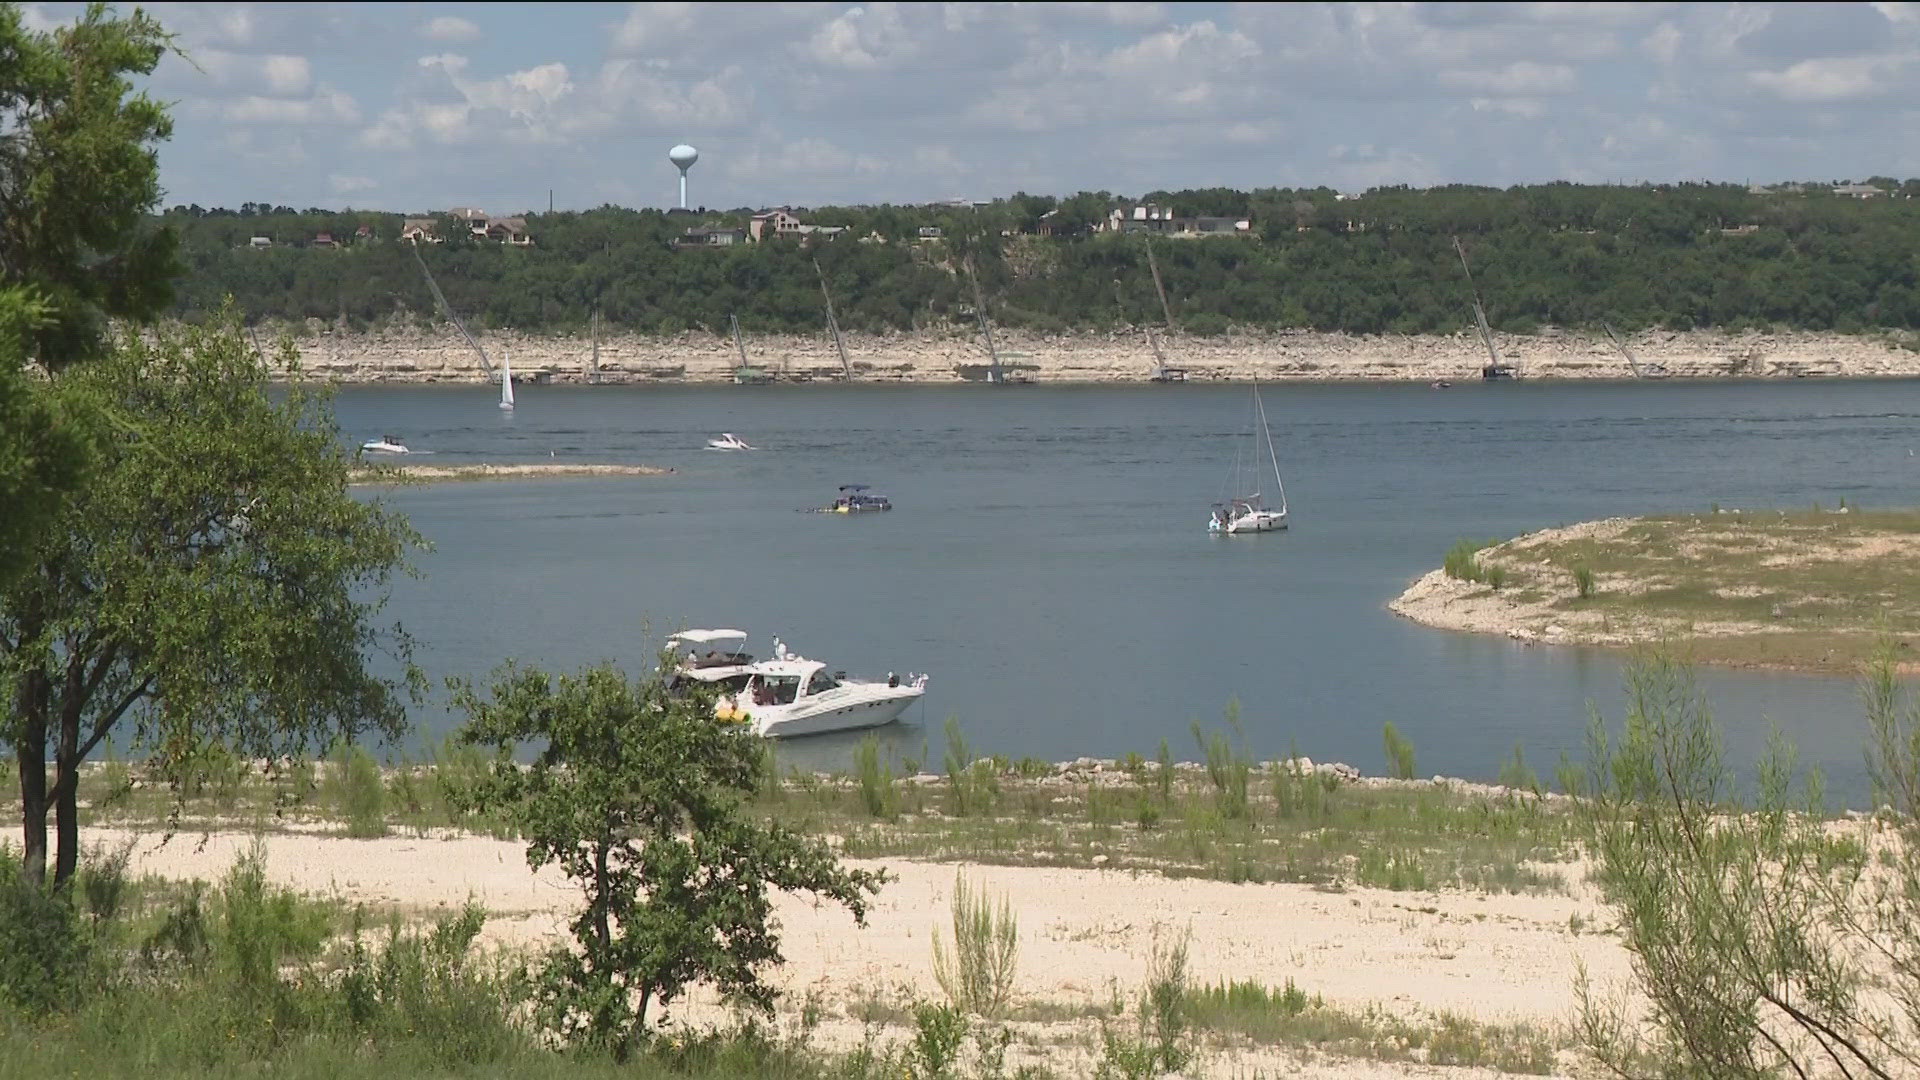 Just before 6 p.m. Sunday, the body of a person matching the description of the missing man was discovered in a cove near Arkansas Bend County Park.